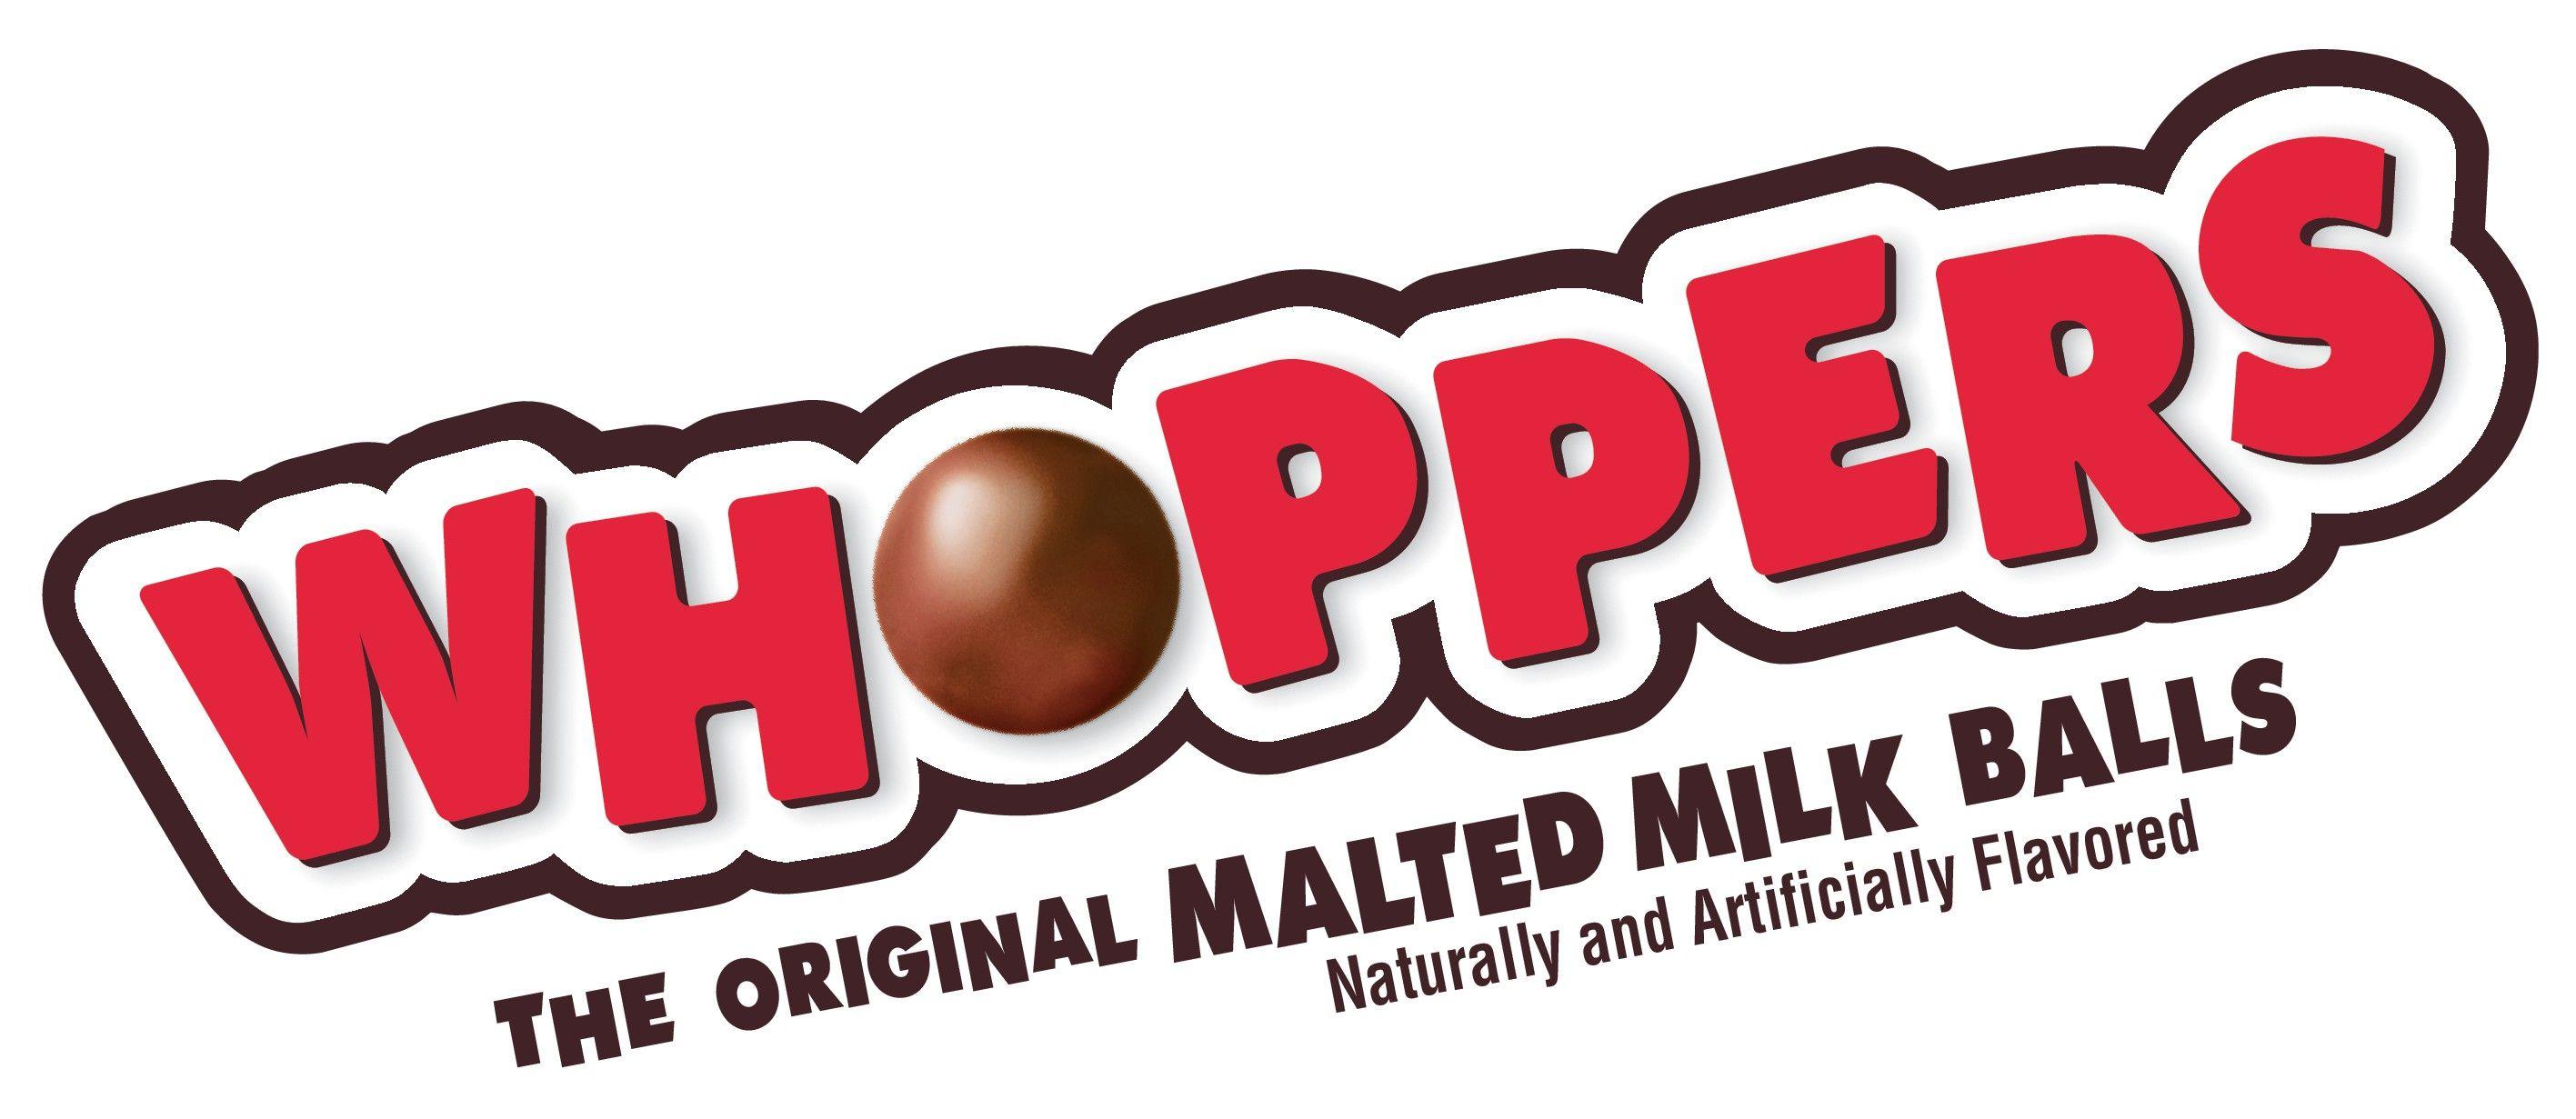 Whoppers Logo - Whoppers Malted Milk Balls. The Original Malted Milk Candy